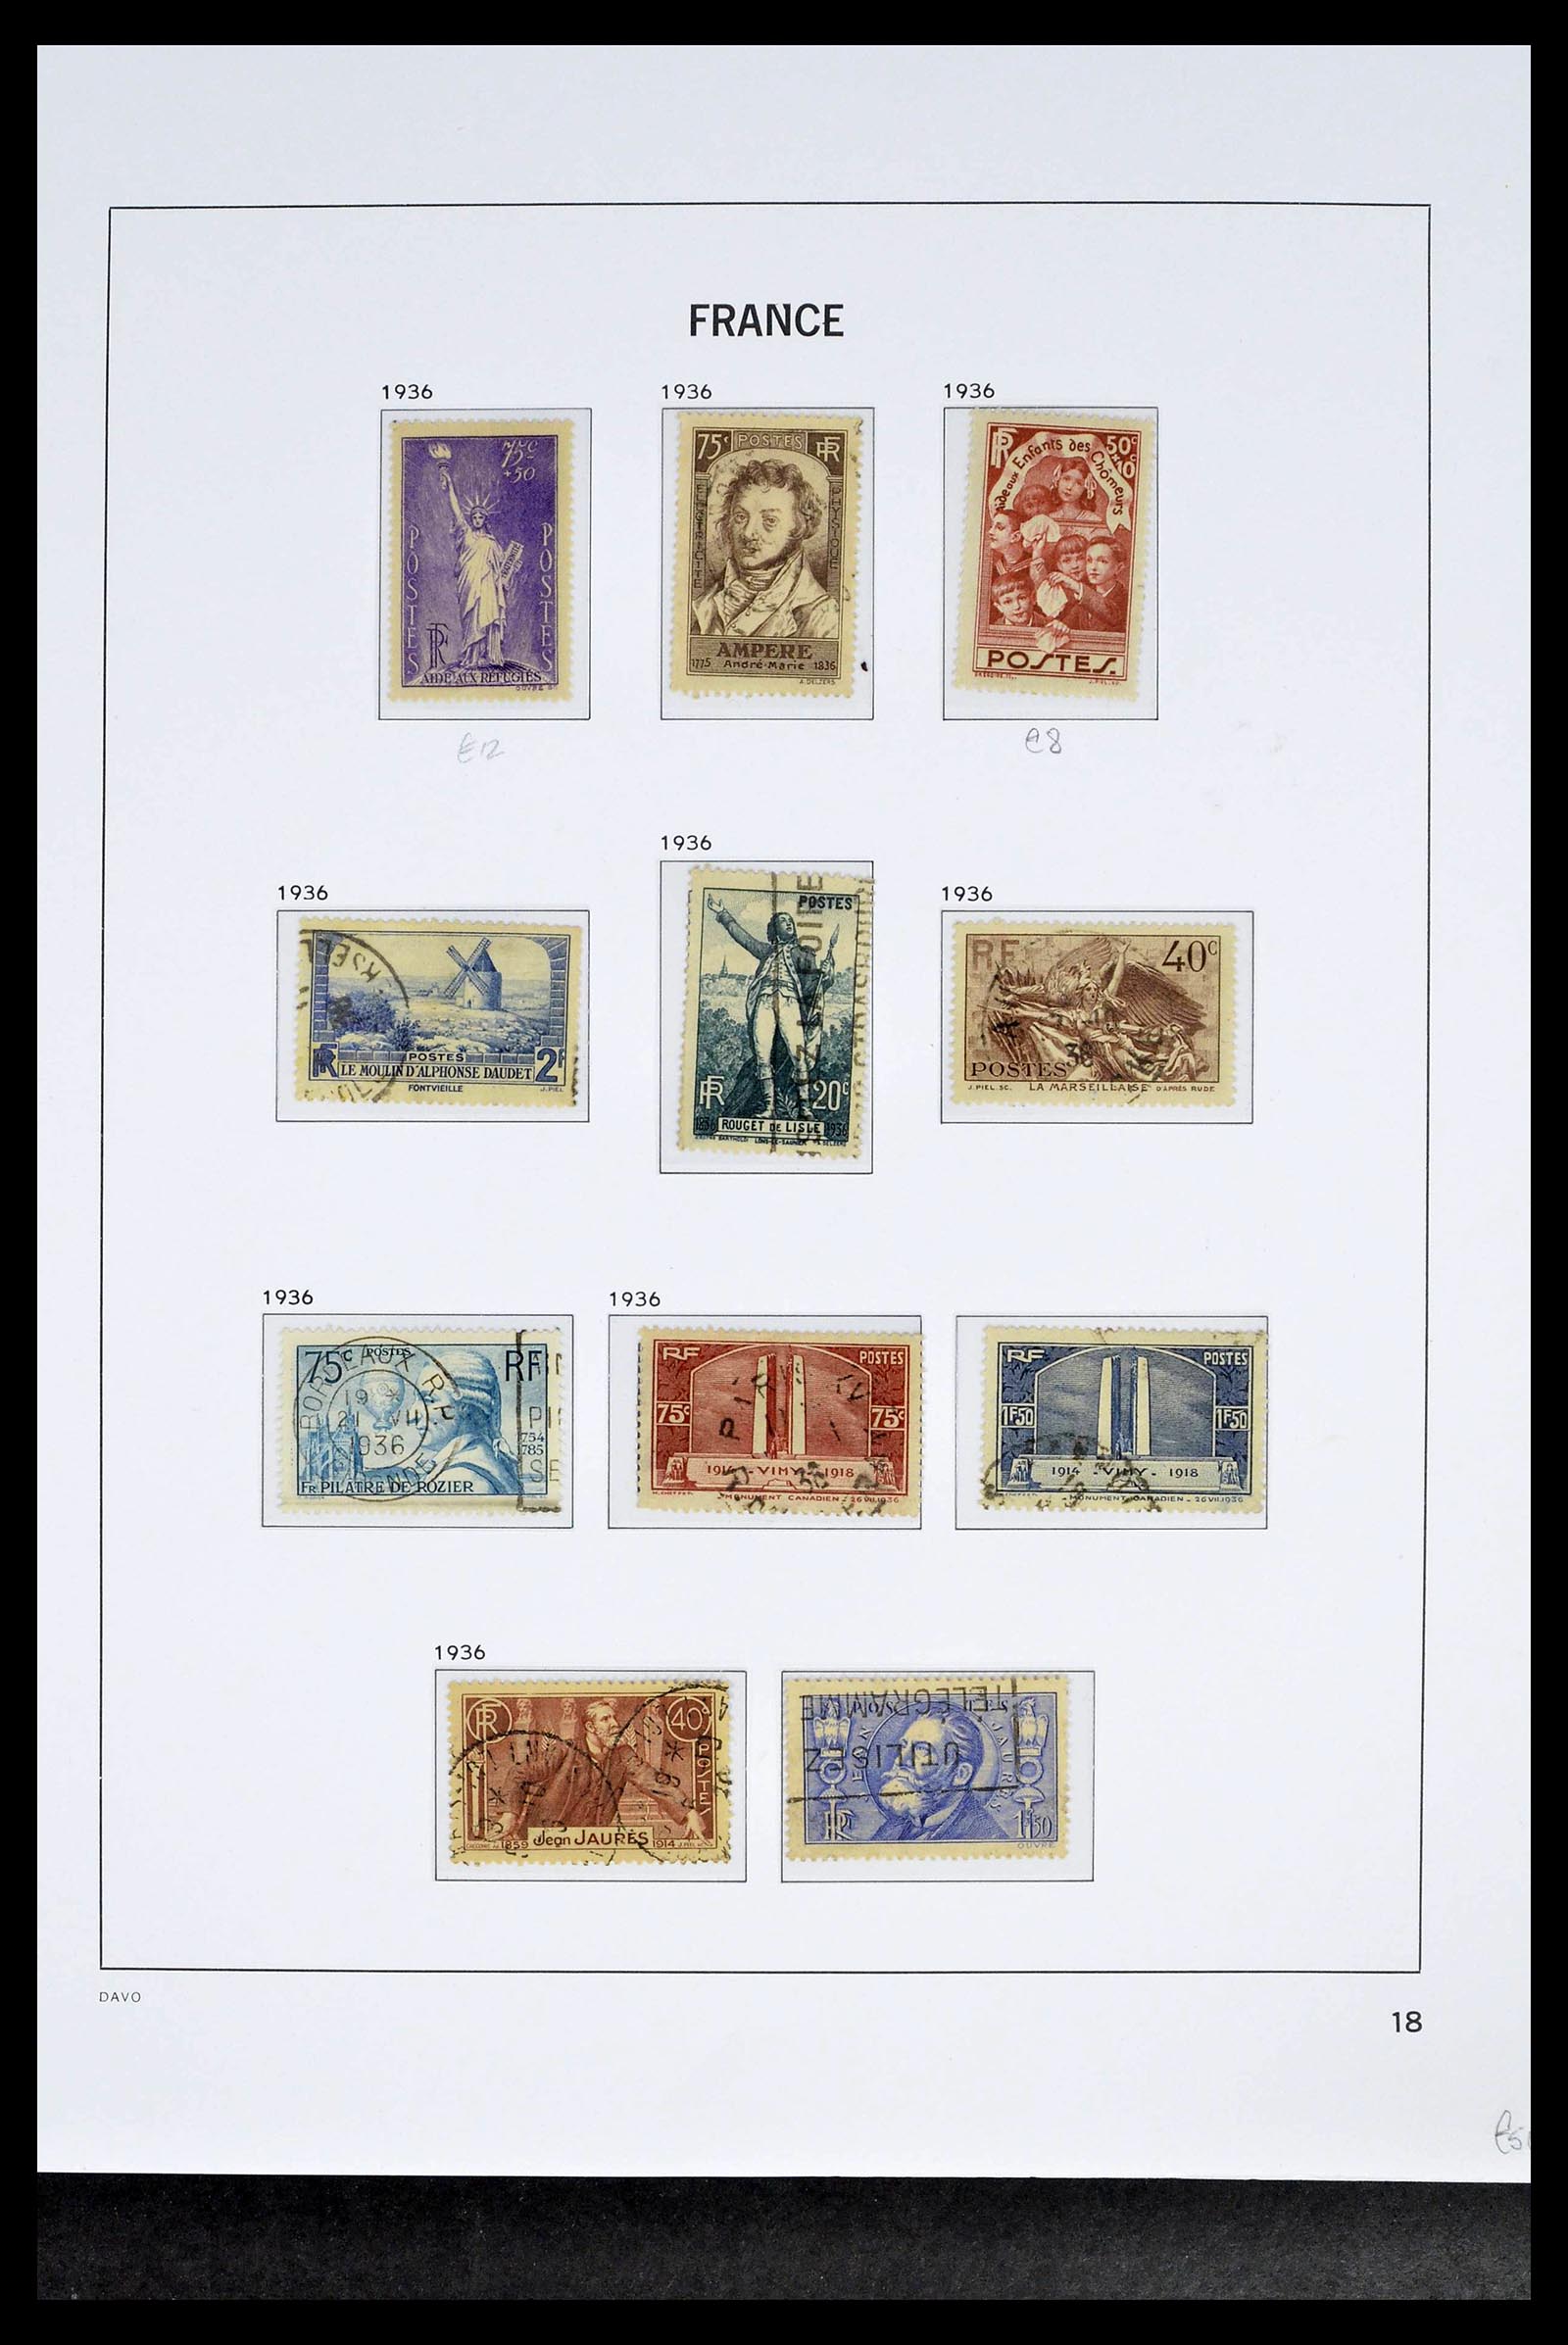 39335 0033 - Stamp collection 39335 France 1849-1969.